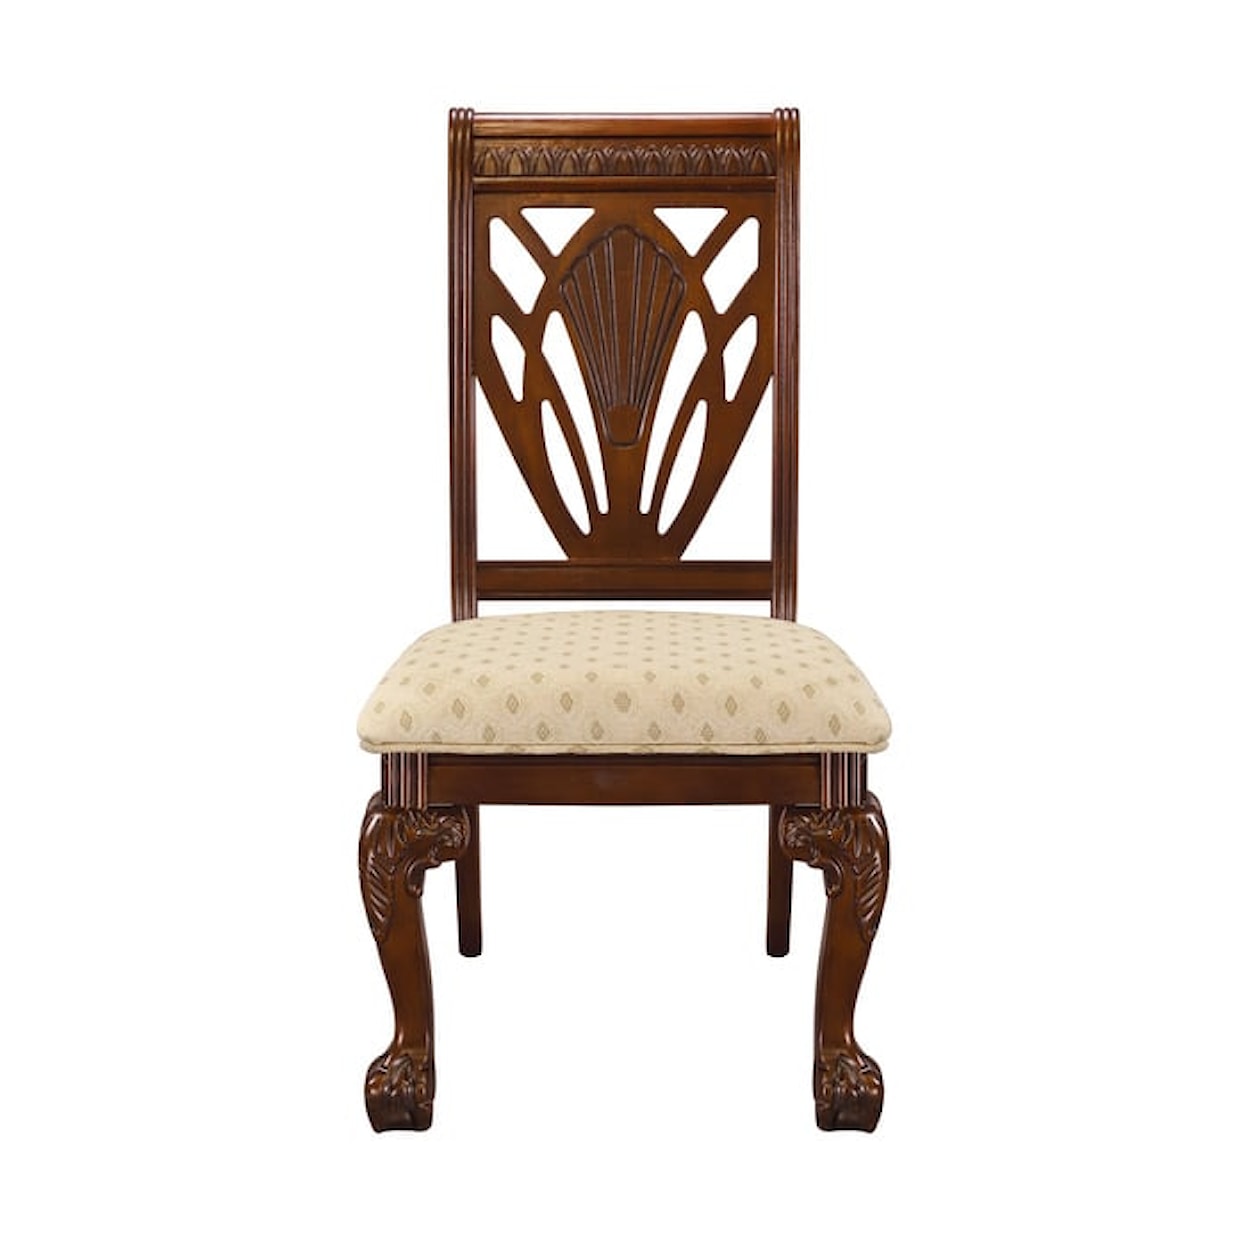 Homelegance Norwich Side Chair